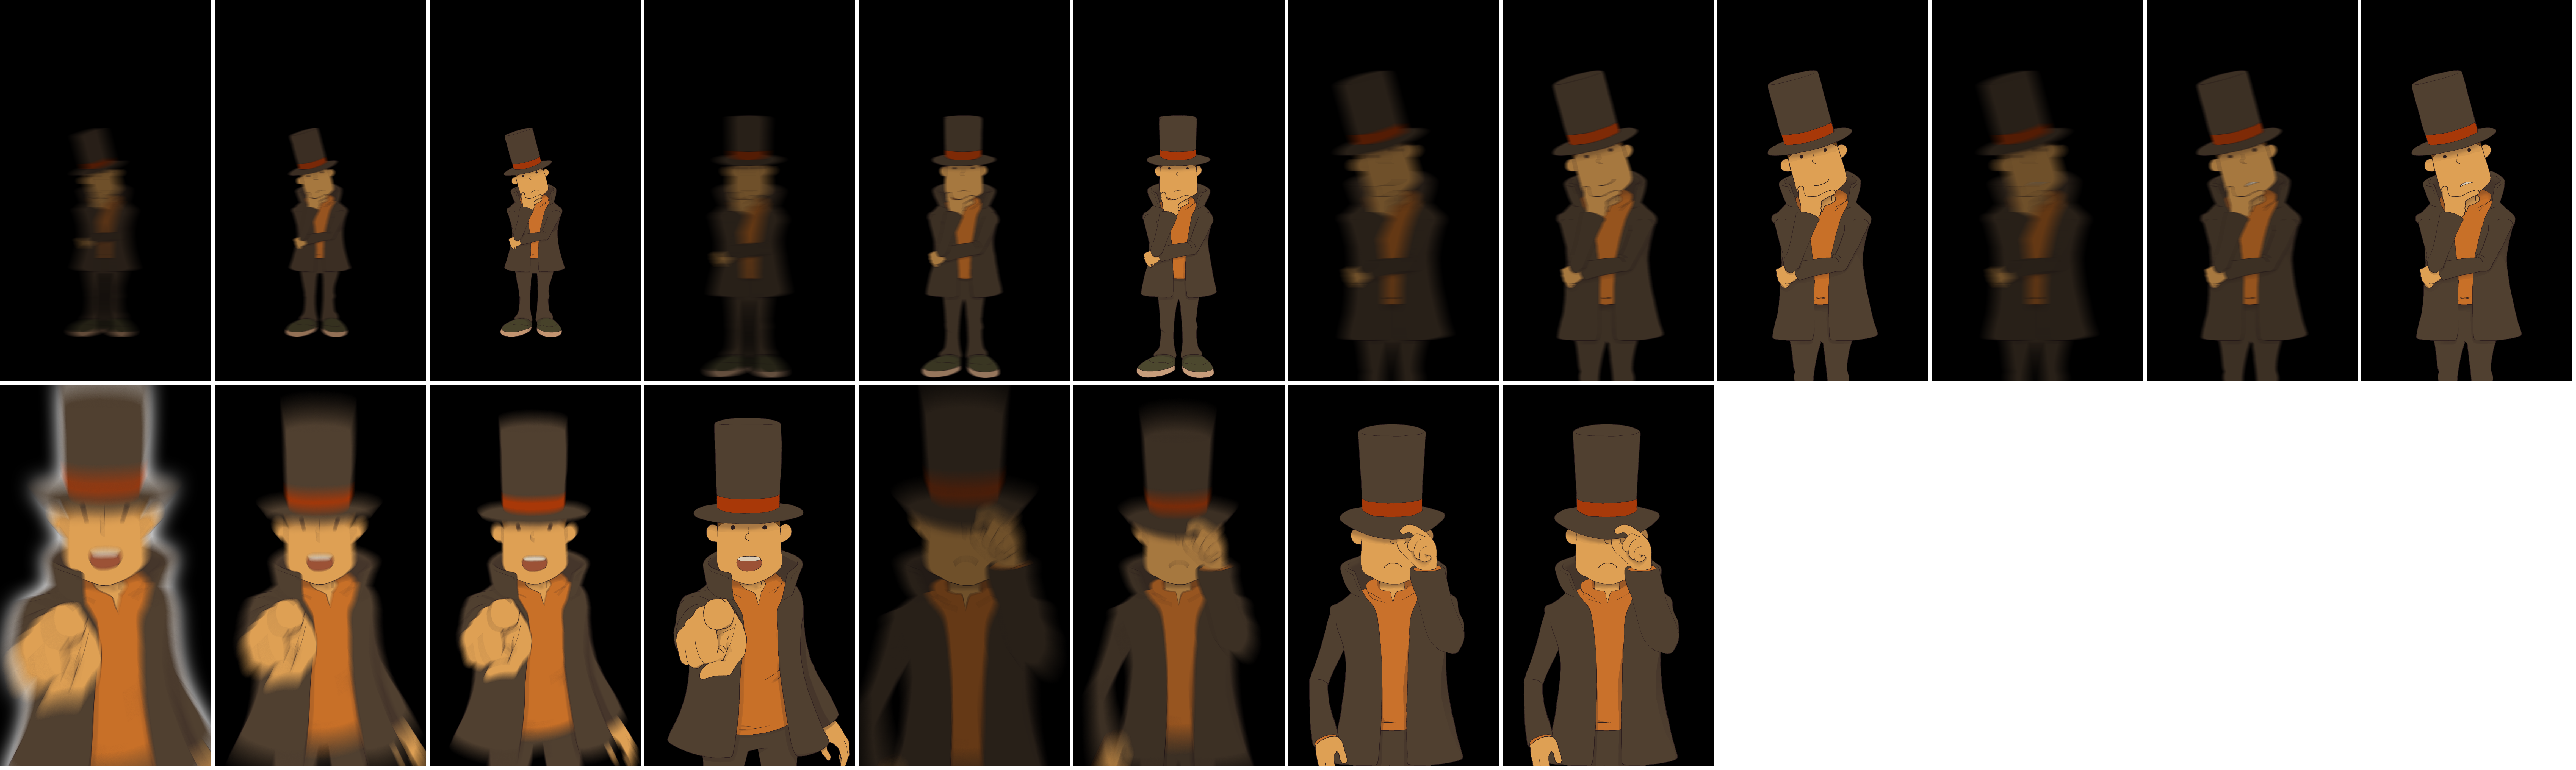 Professor Layton and the Unwound Future in HD - Layton Puzzle Answers